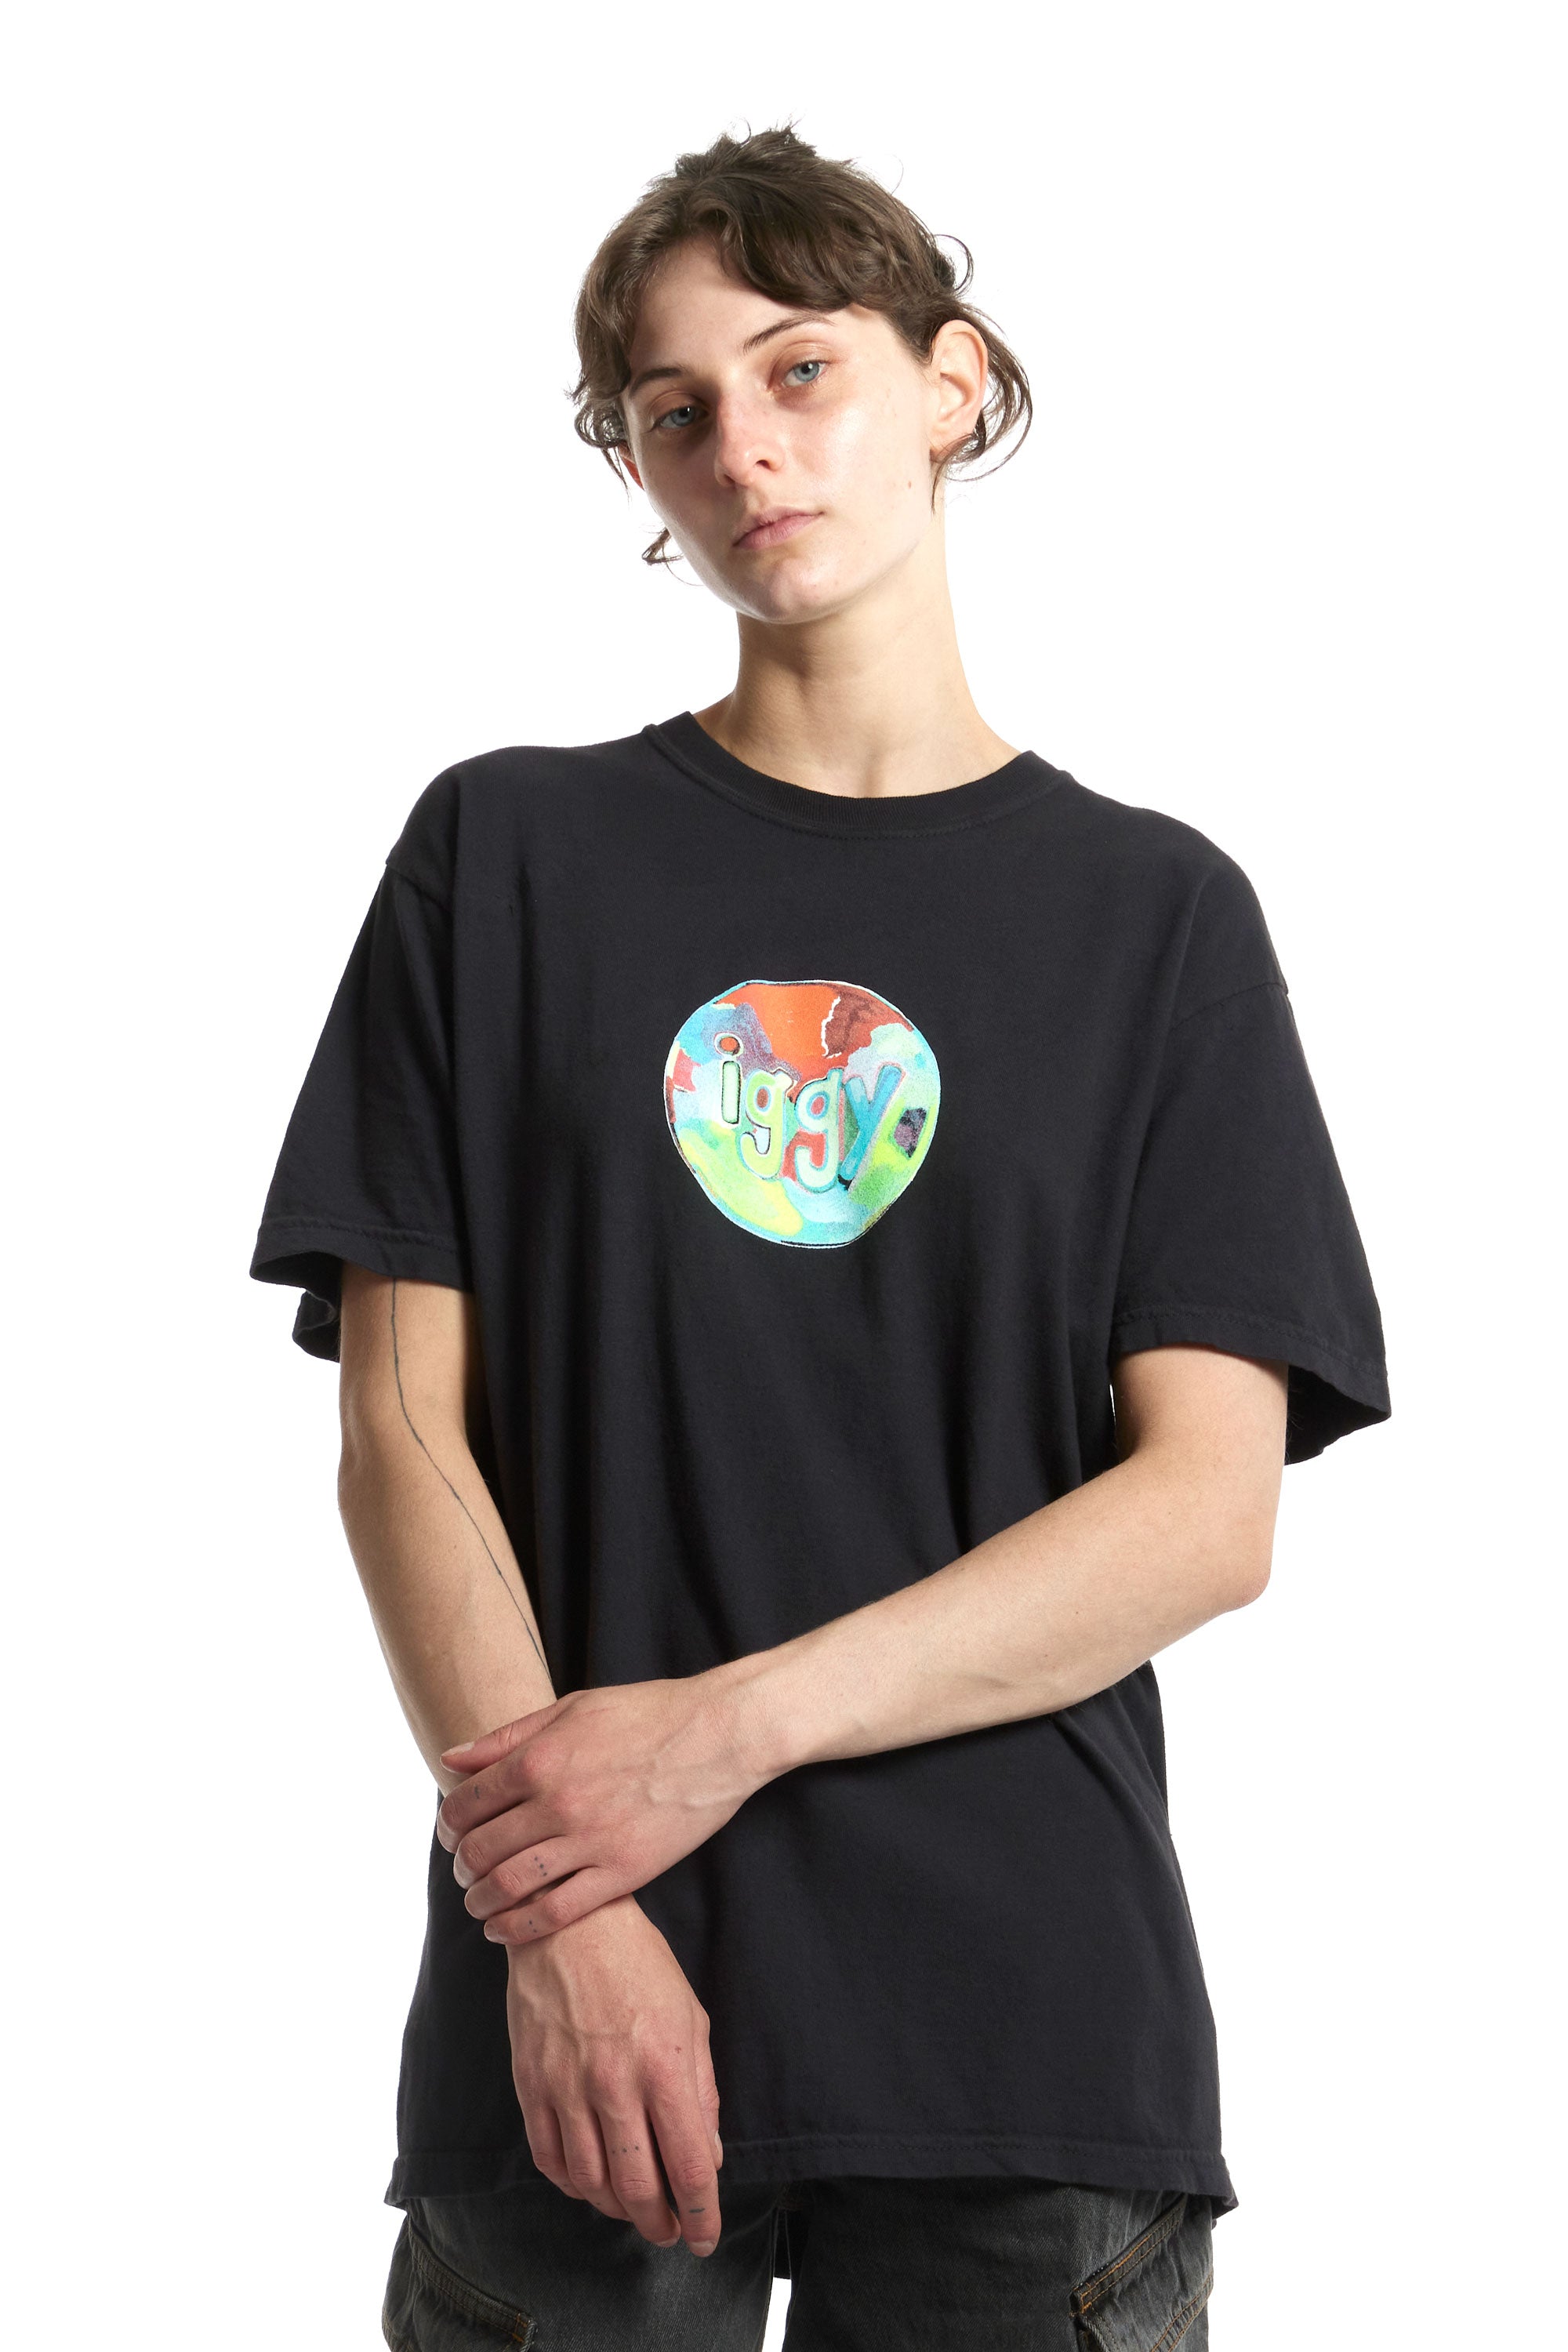 The IGGY - PAINTERLY LOGO T SHIRT  available online with global shipping, and in PAM Stores Melbourne and Sydney.